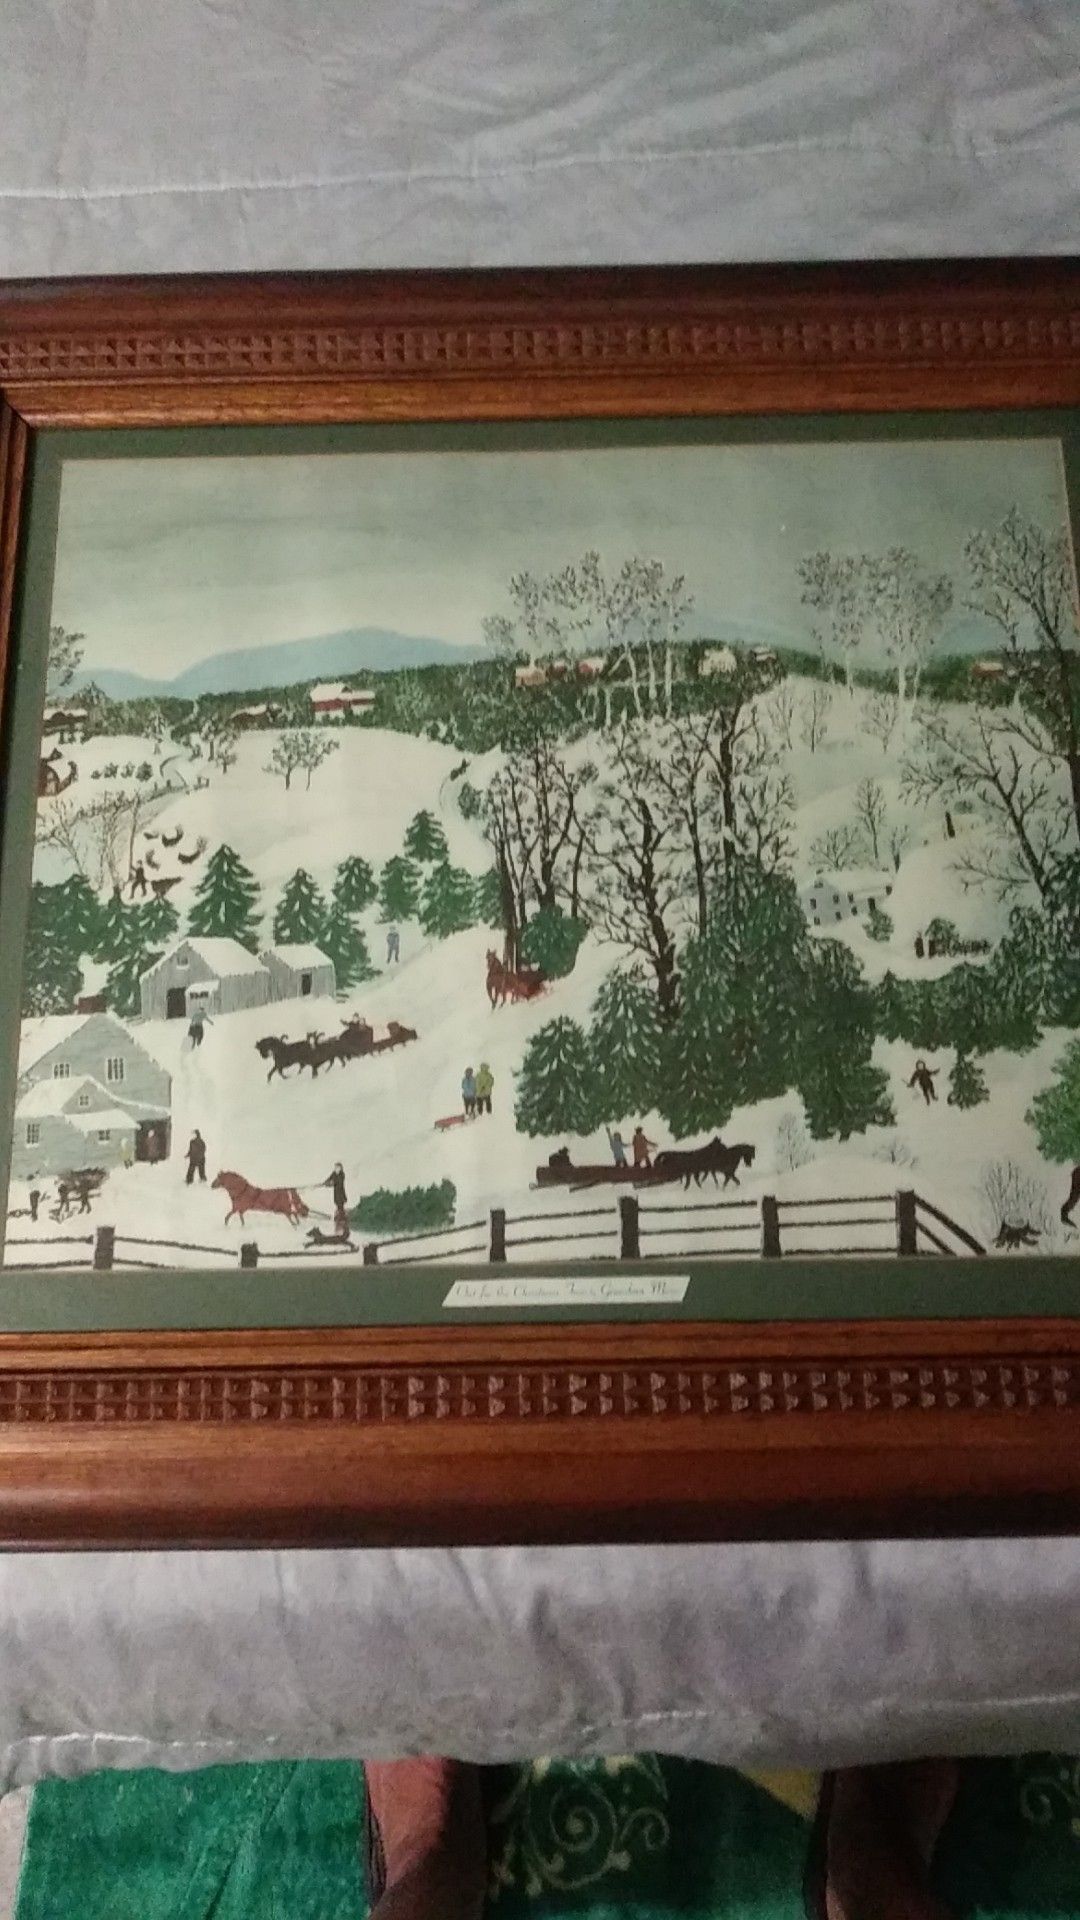 Out for the Christmas Trees by Grandma Moses